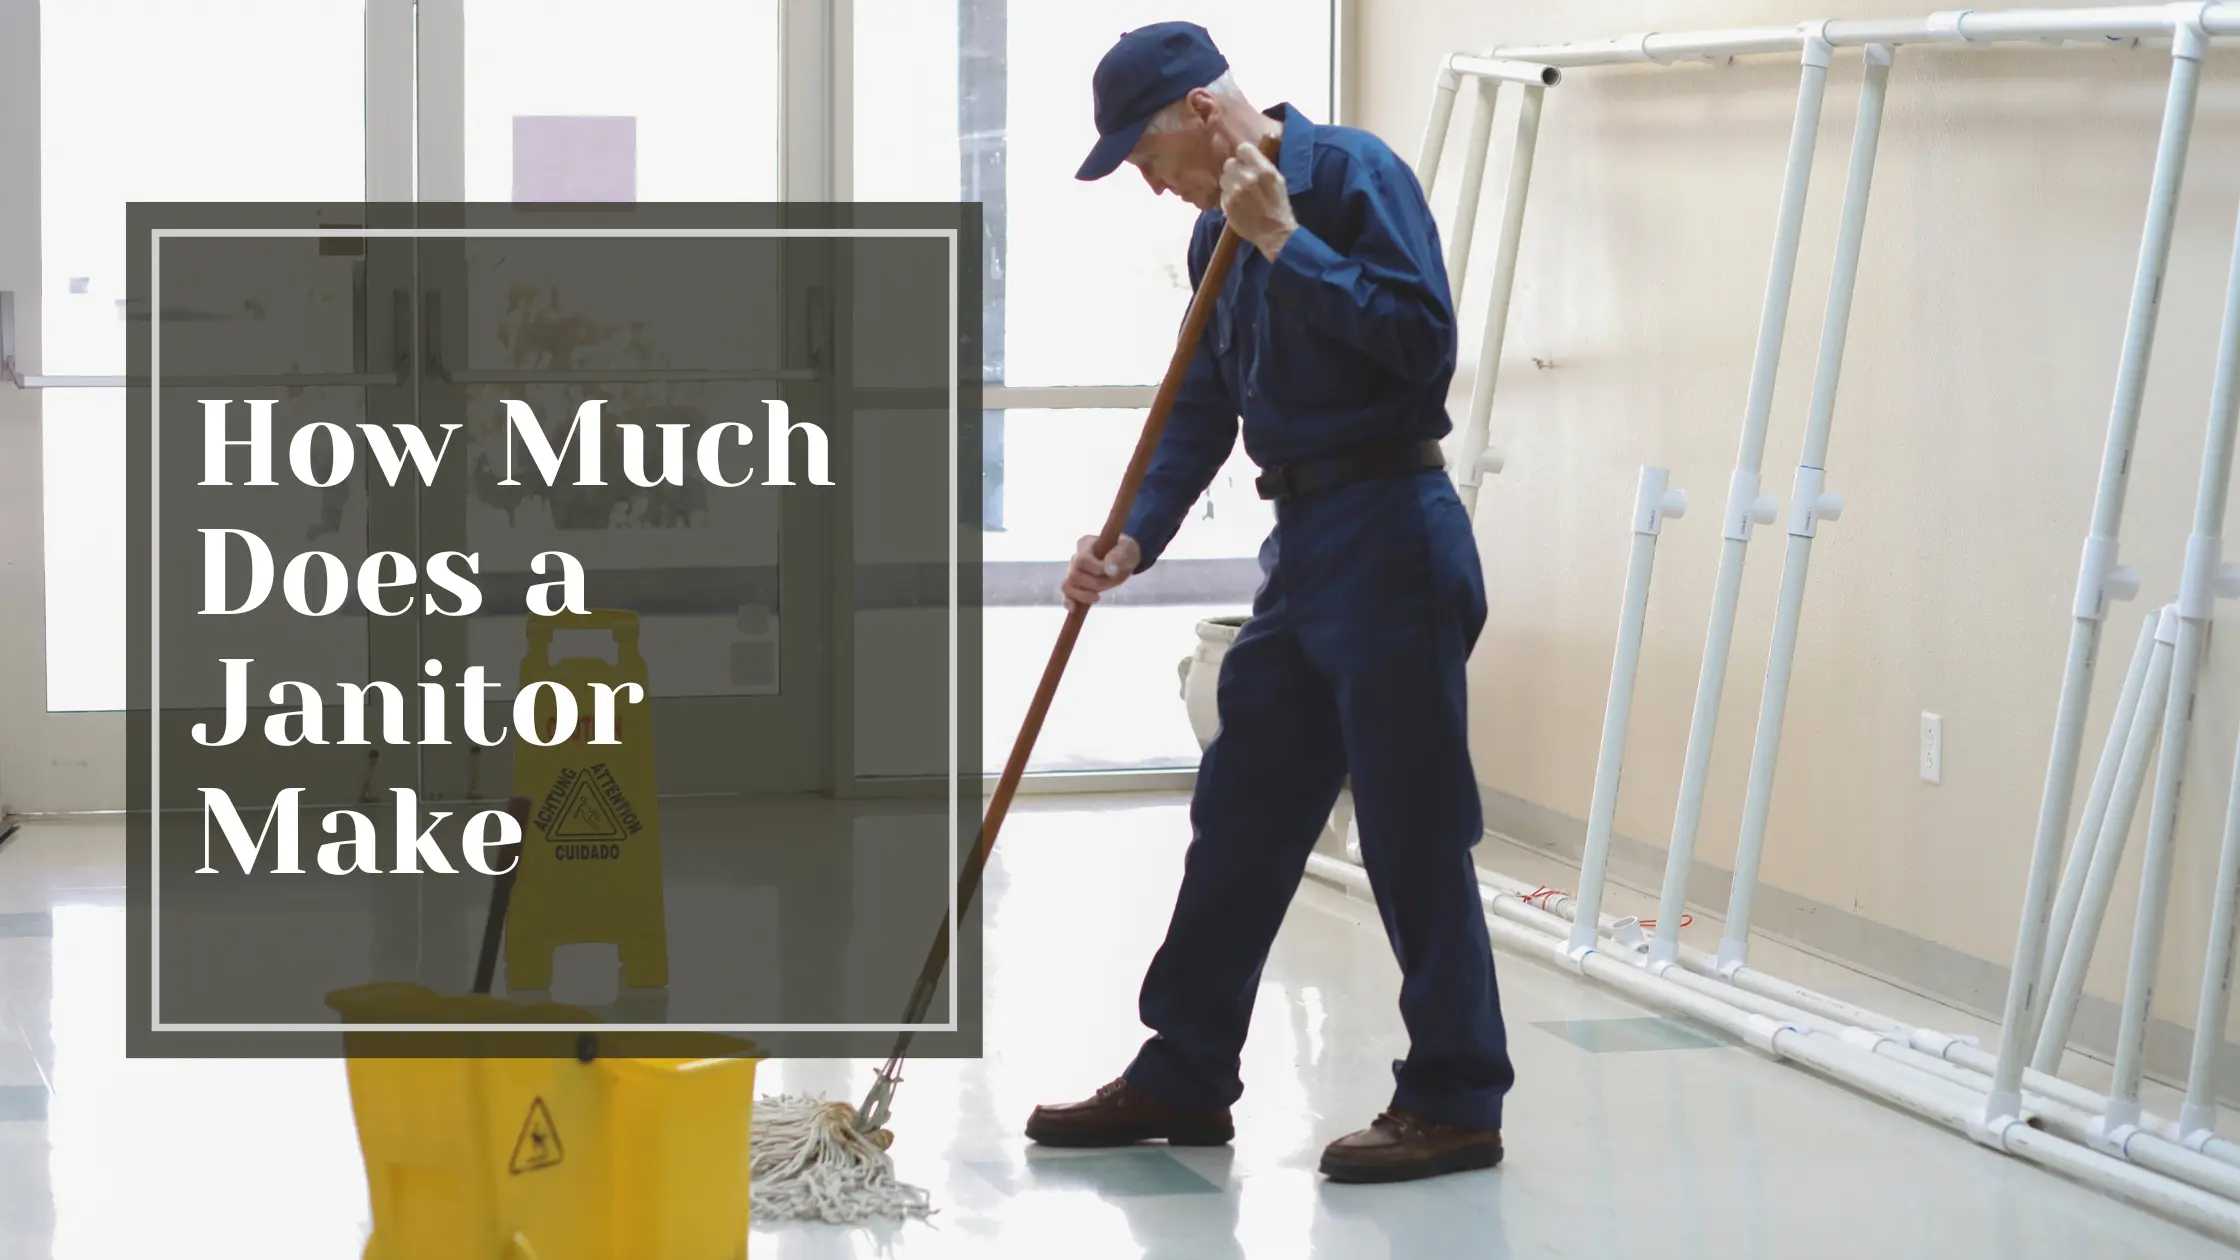 How Much Does a Janitor Make